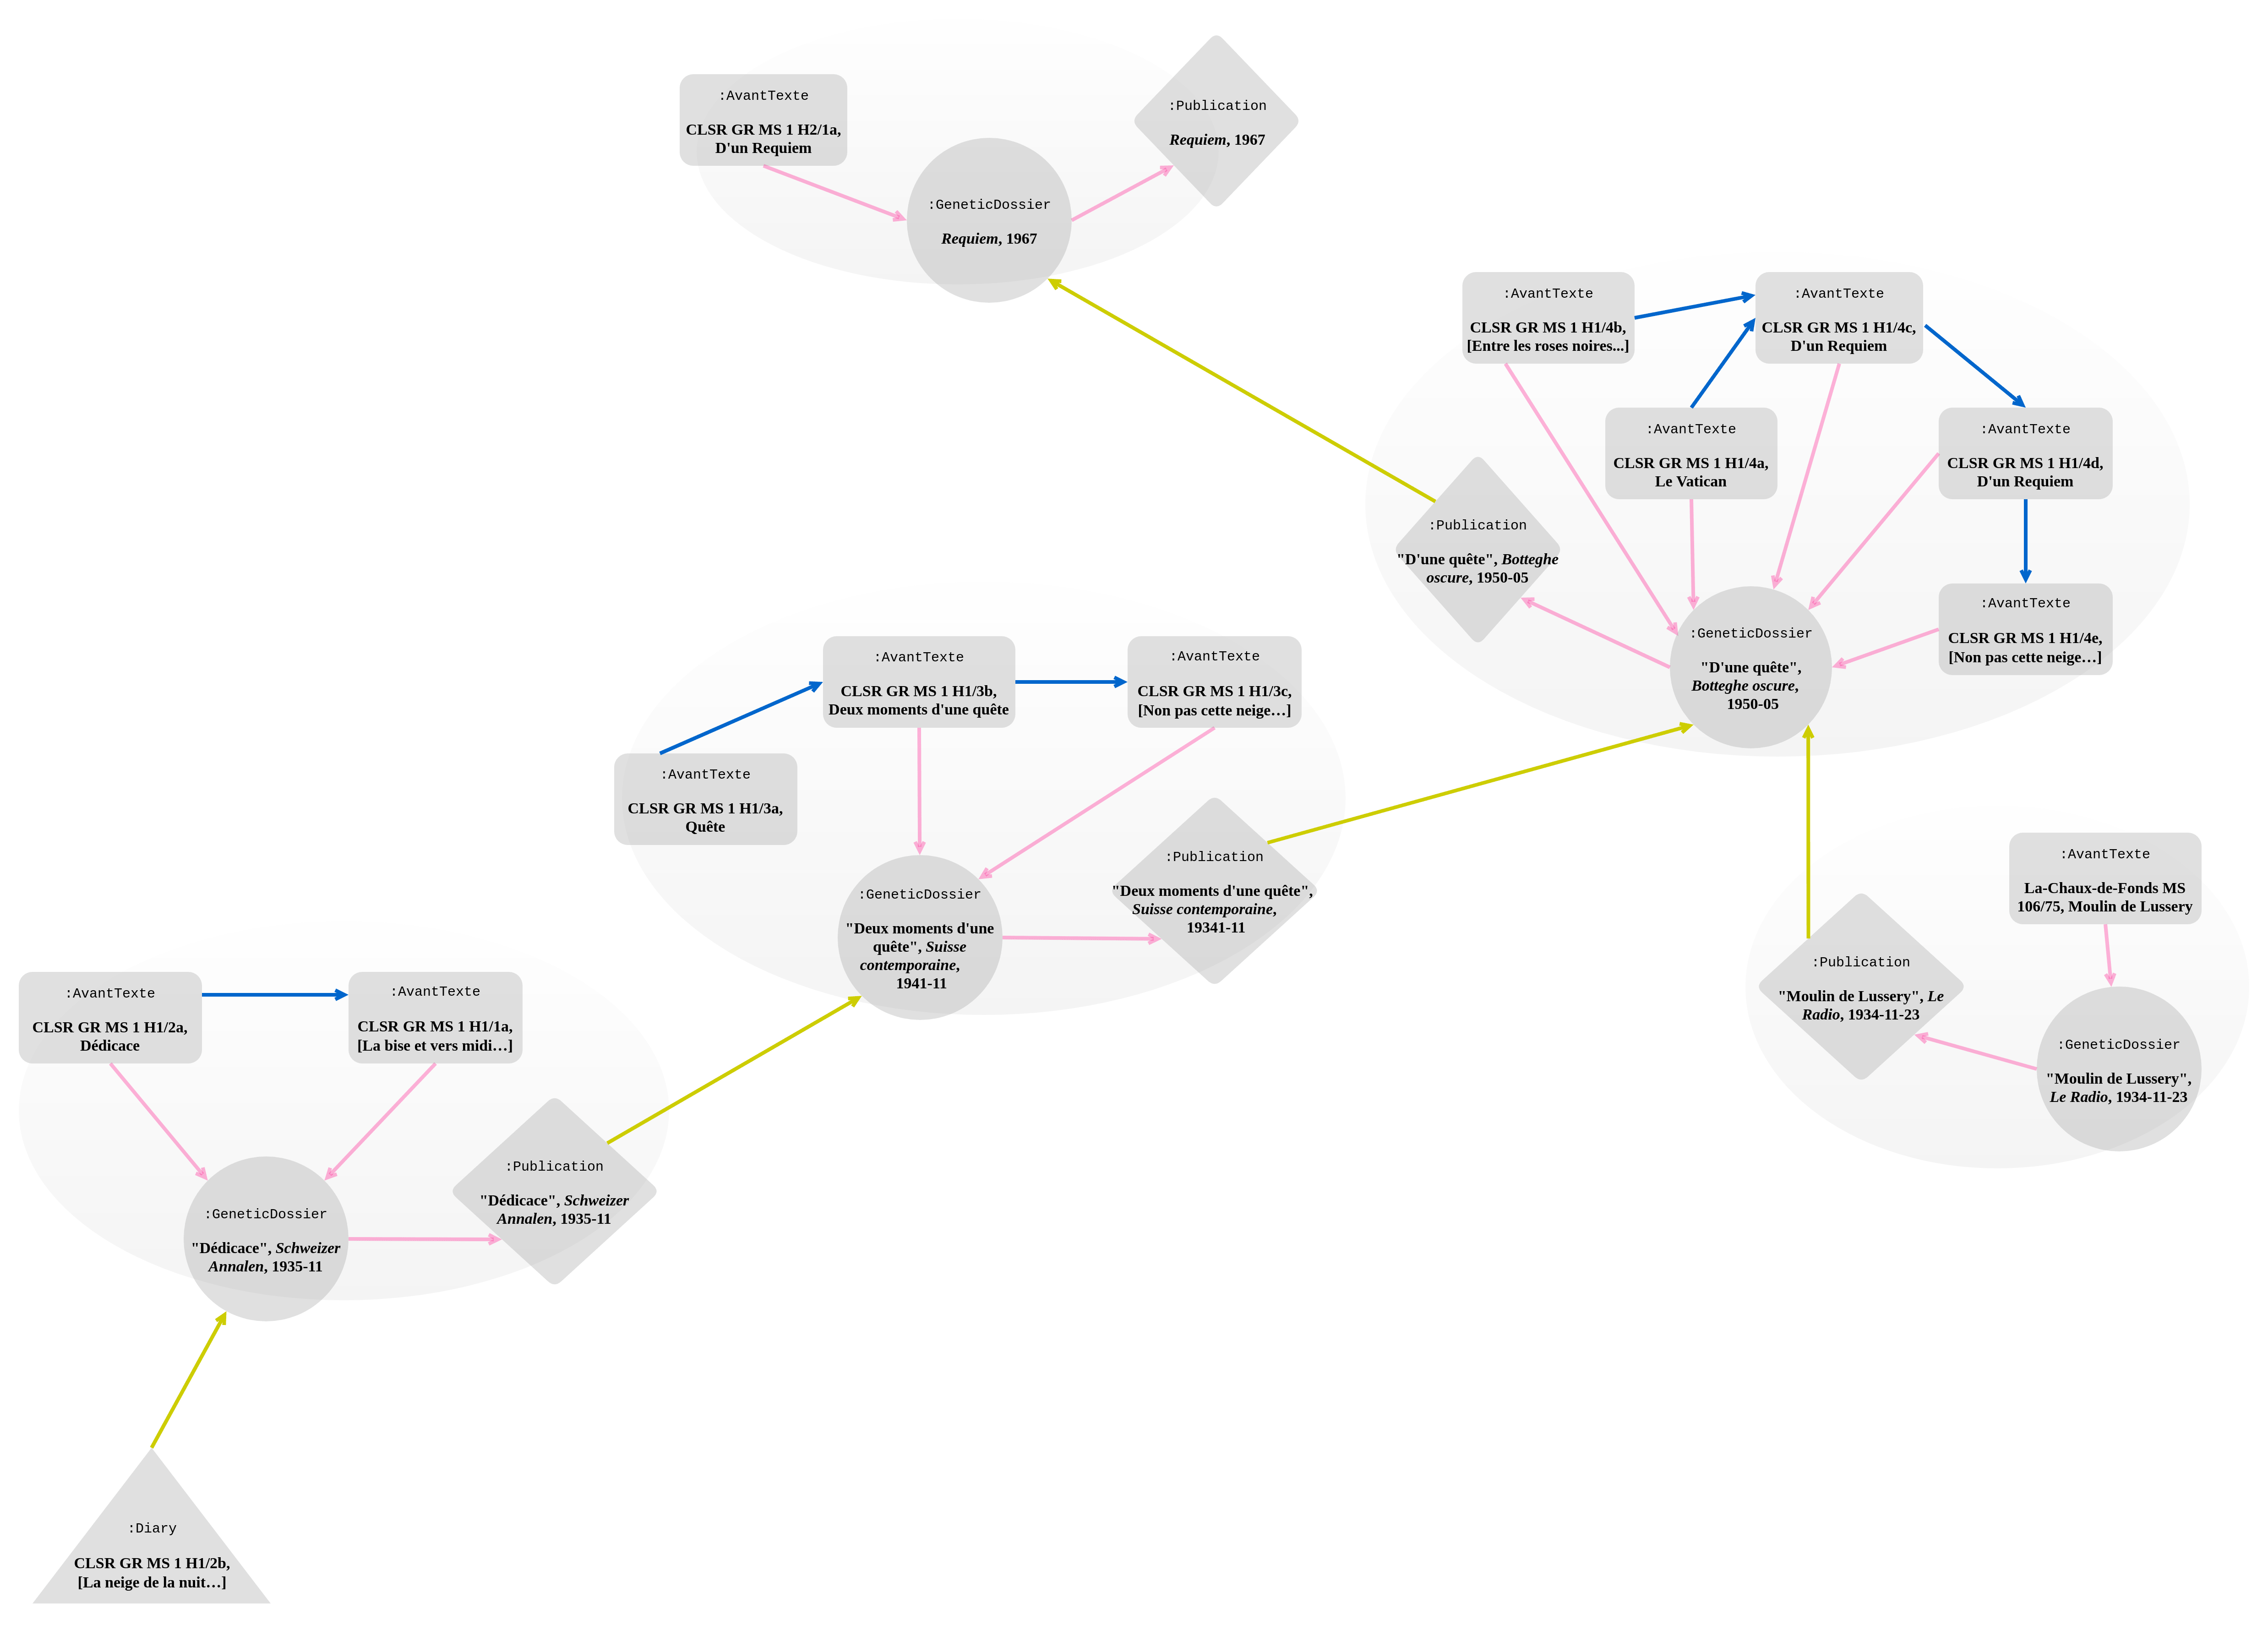 Genetic network of Requiem (part 1). Links to and from the genetic dossier are in pinkt; the property :avantTexteIsBeforeInAvantTexte in blue; sub-properties of :isReusedIn in yellow. Labels are sometimes omitted to avoid overcrowding the diagram.